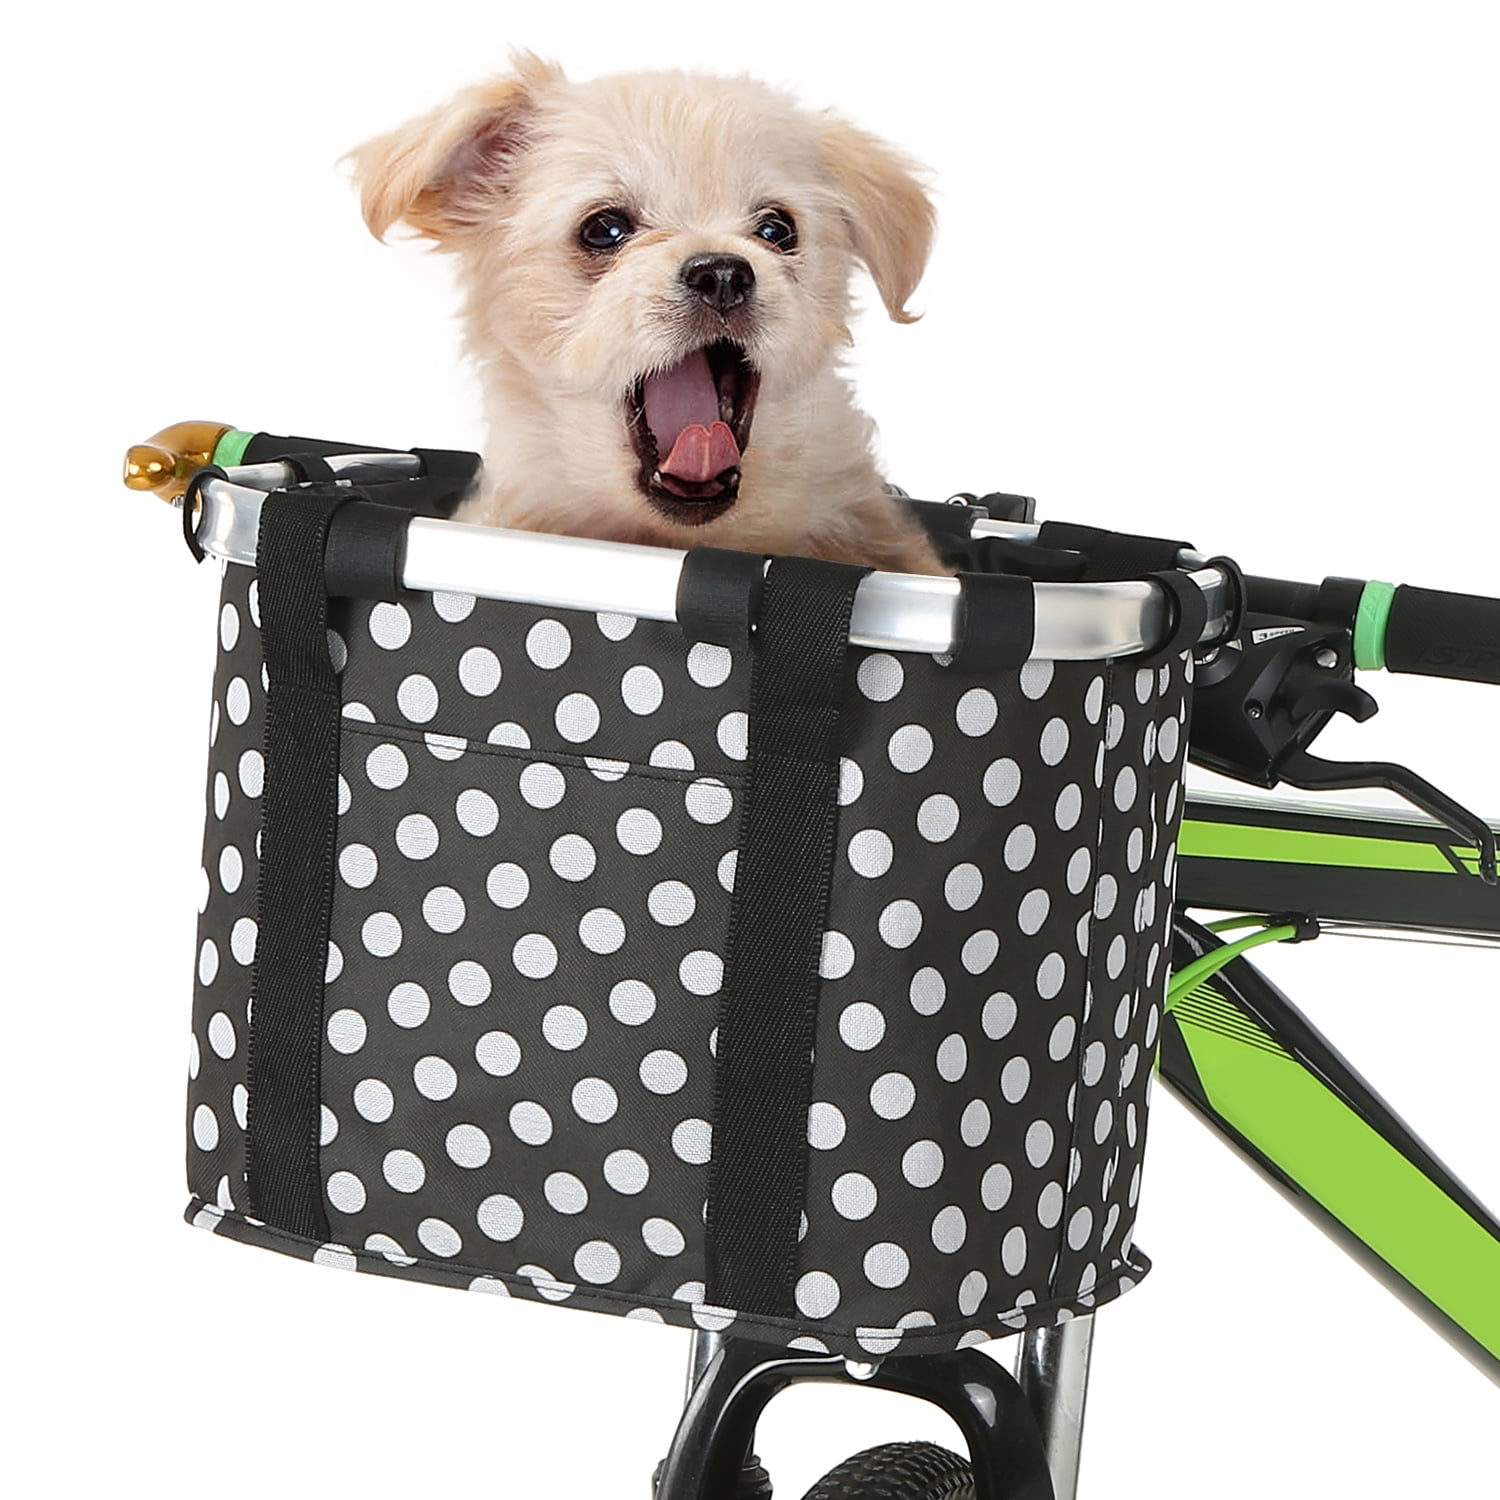 Small Pet Cat Dog Carrier Front Removable Bicycle Handlebar Basket Per Newly Waterproof Bike Basket Liner Waterproof Rain Cover Fits Most Bicycle Basket Bicycle Shopping Bag for Grocery 